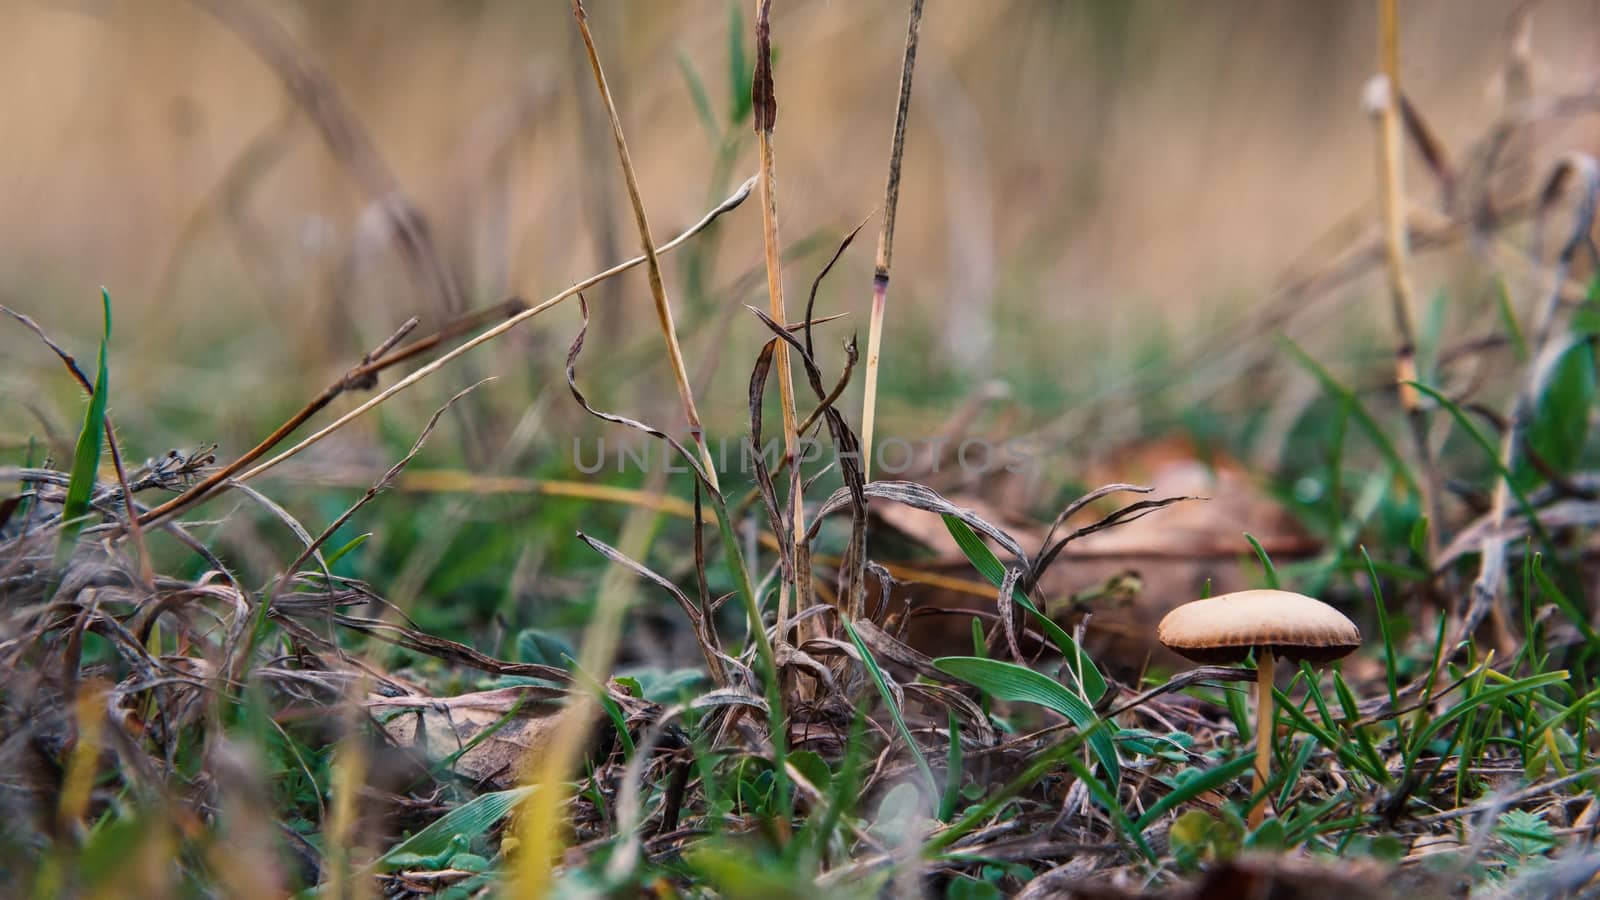 Forest little brown mushroom in the grass